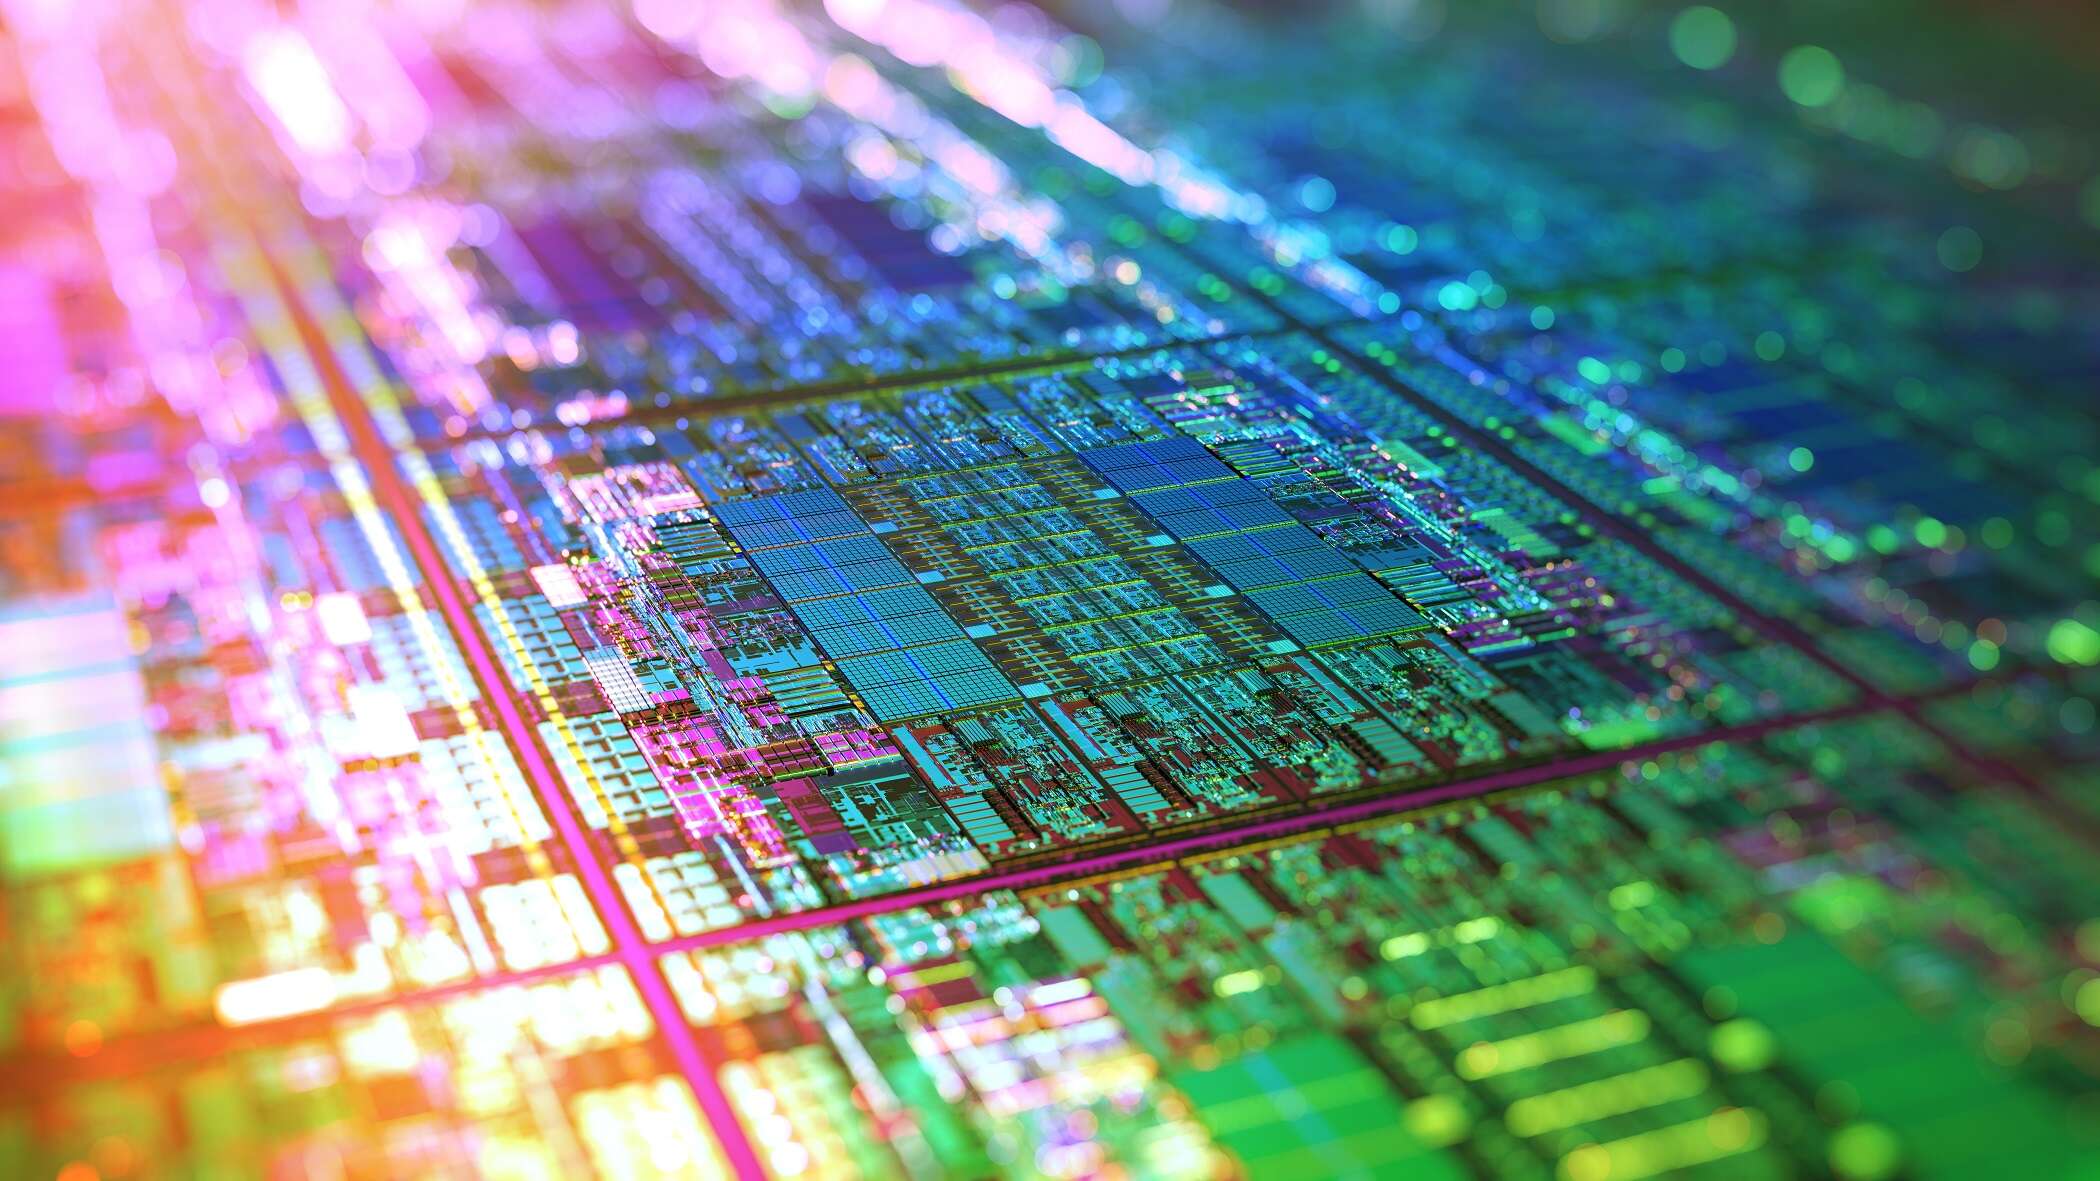 Chip wars: Intel and Apple battle to access TSMC's 3nm process node